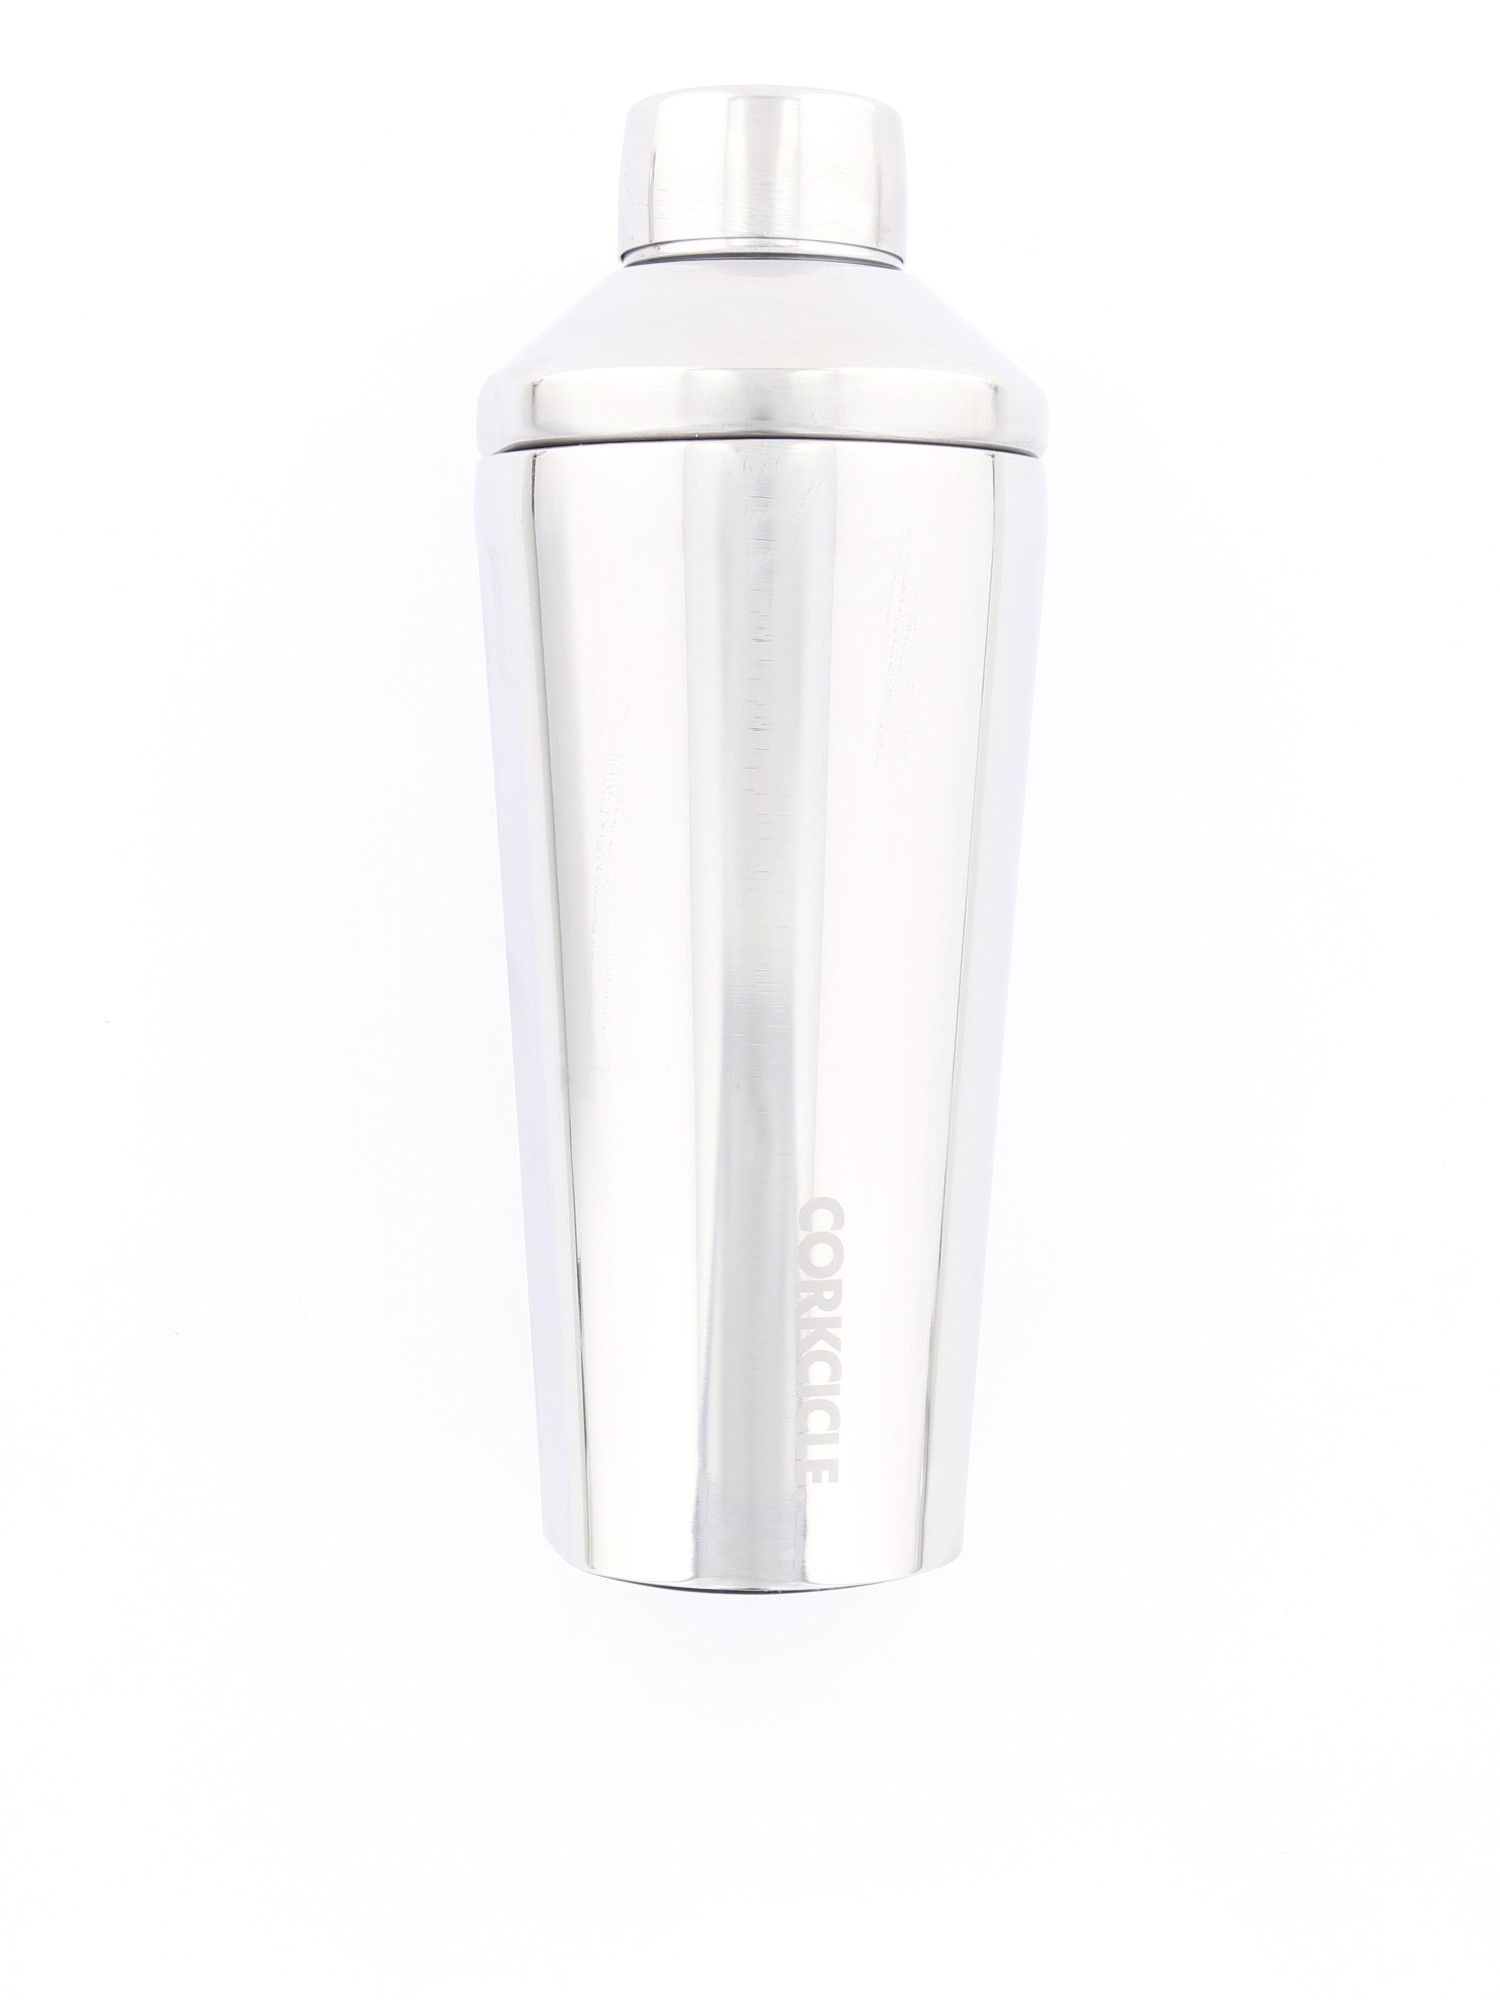 Corkcicle Stainless Steel Cocktail Shaker with Lid 470ml